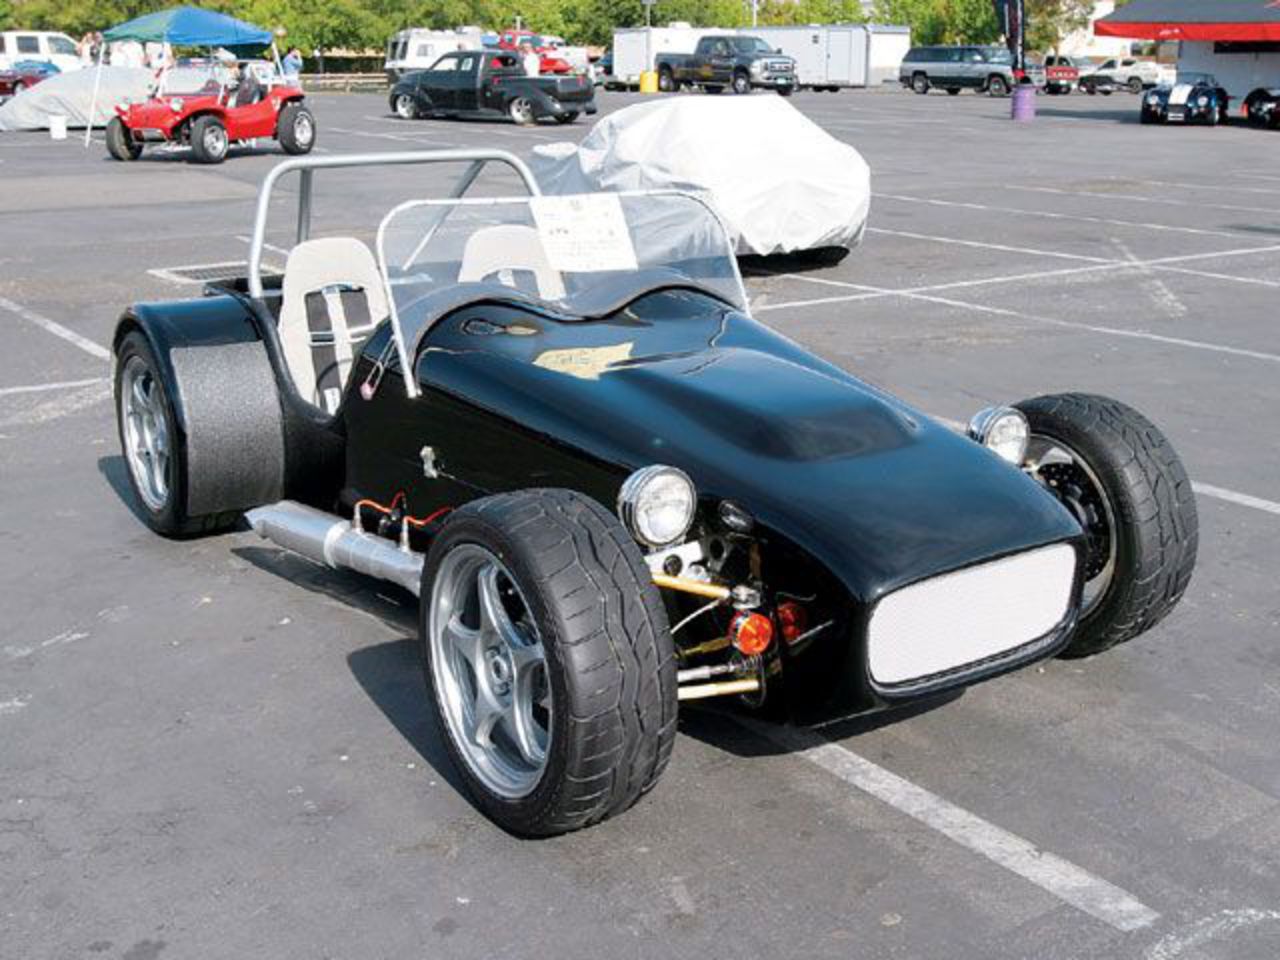 lotus super 7 related images,301 to 350 - Zuoda Images